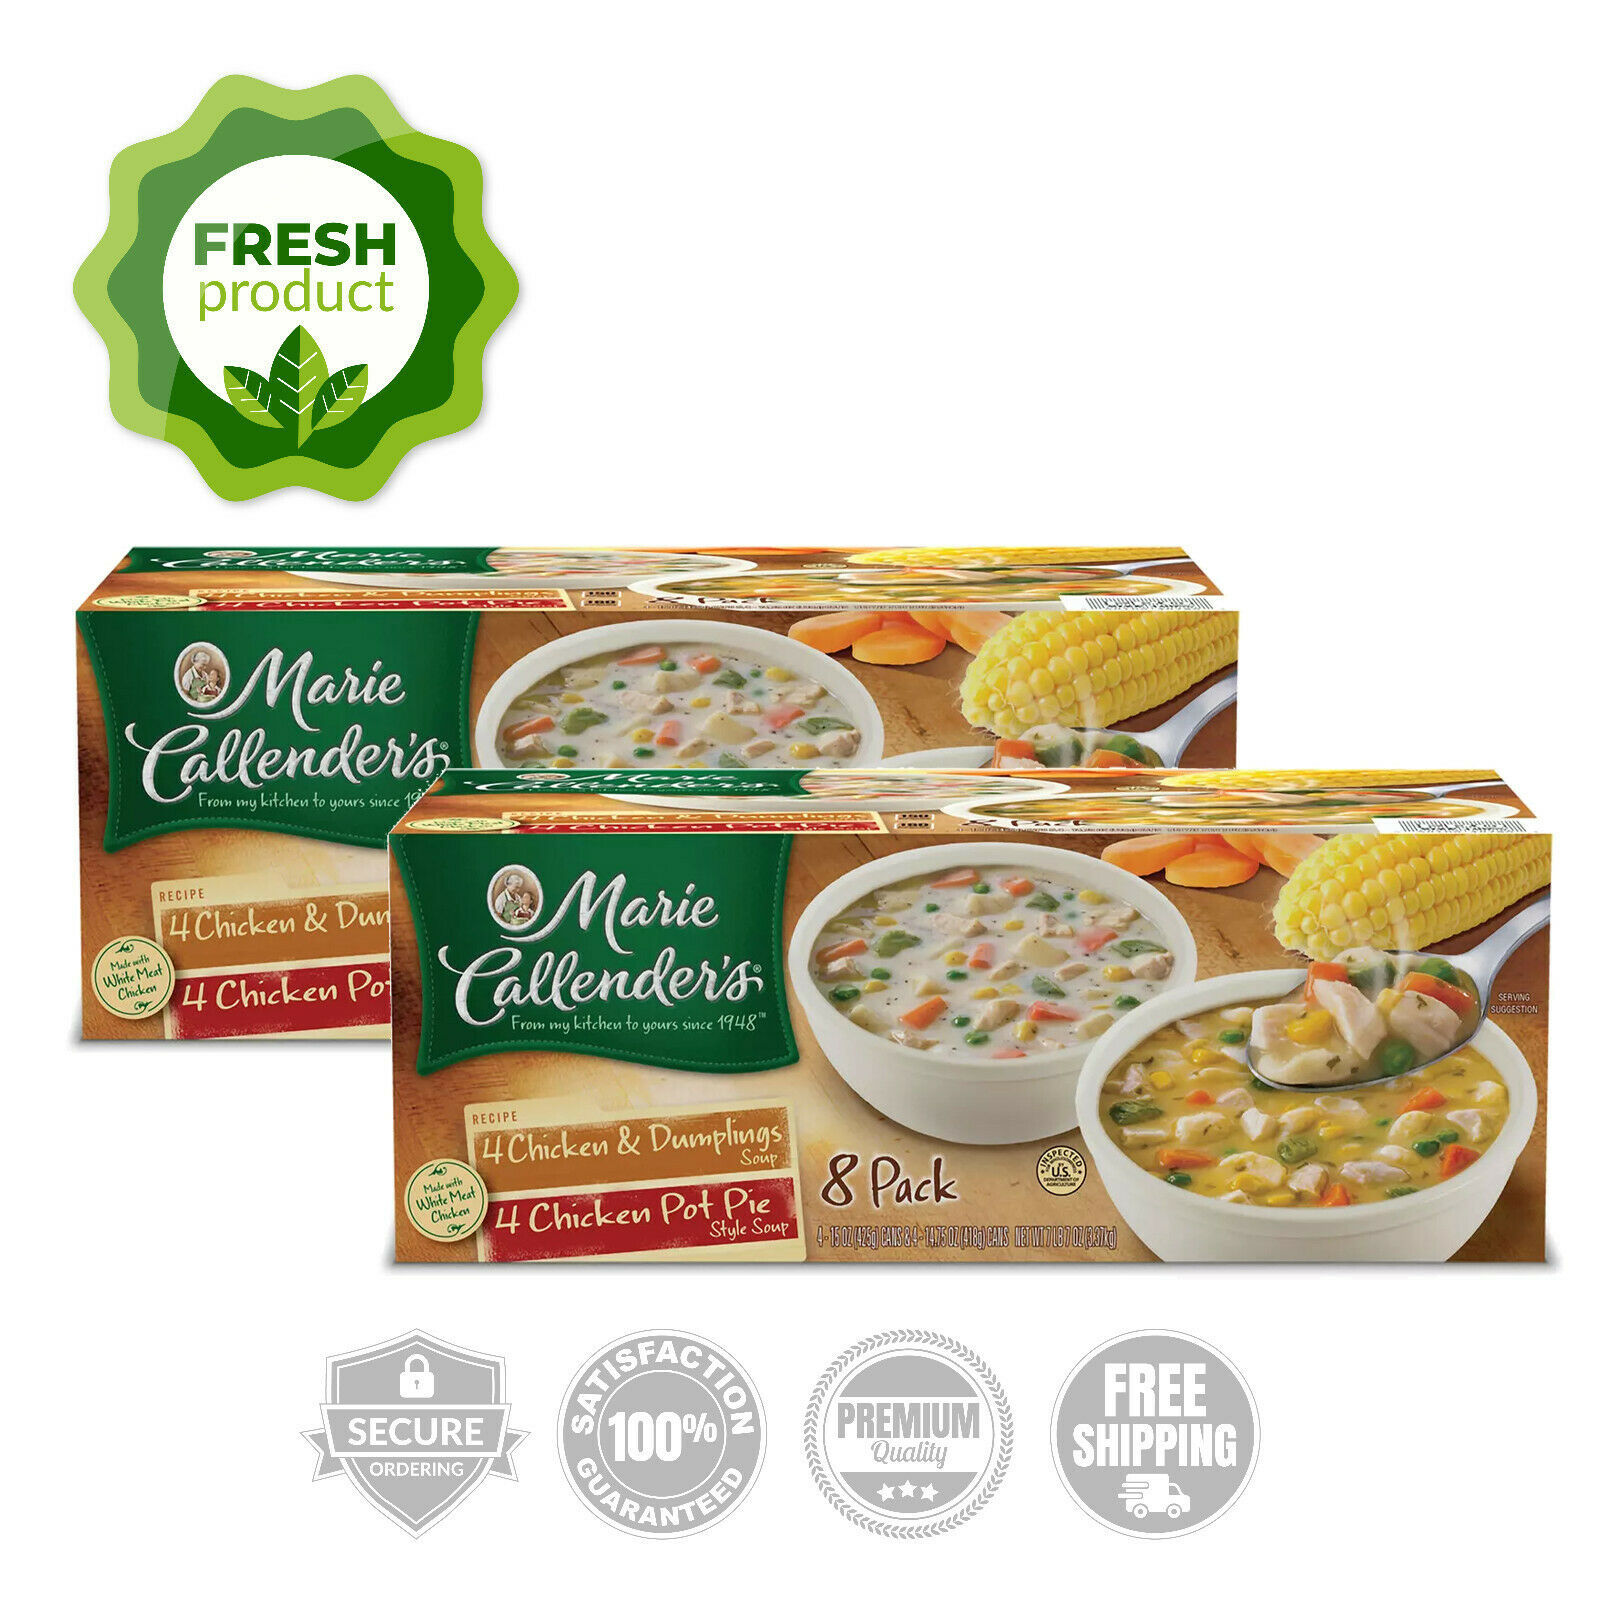 Primary image for Marie Callender's Chicken Variety Soup (8 ct.) (2pk)